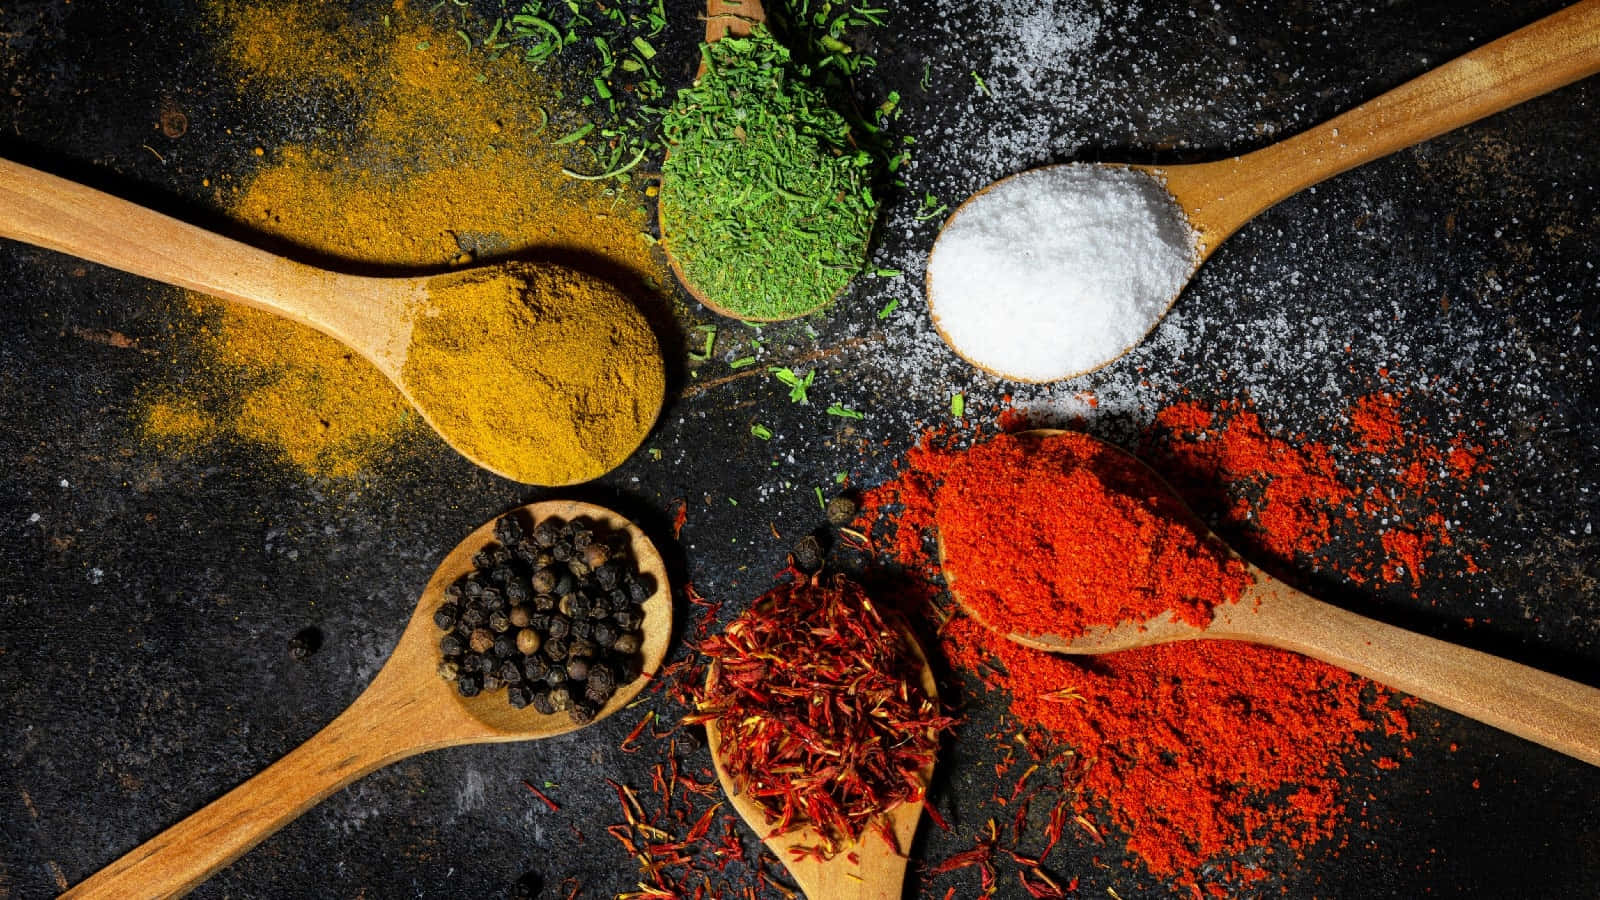 Free Spices Wallpaper Downloads, [100+] Spices Wallpapers for FREE |  